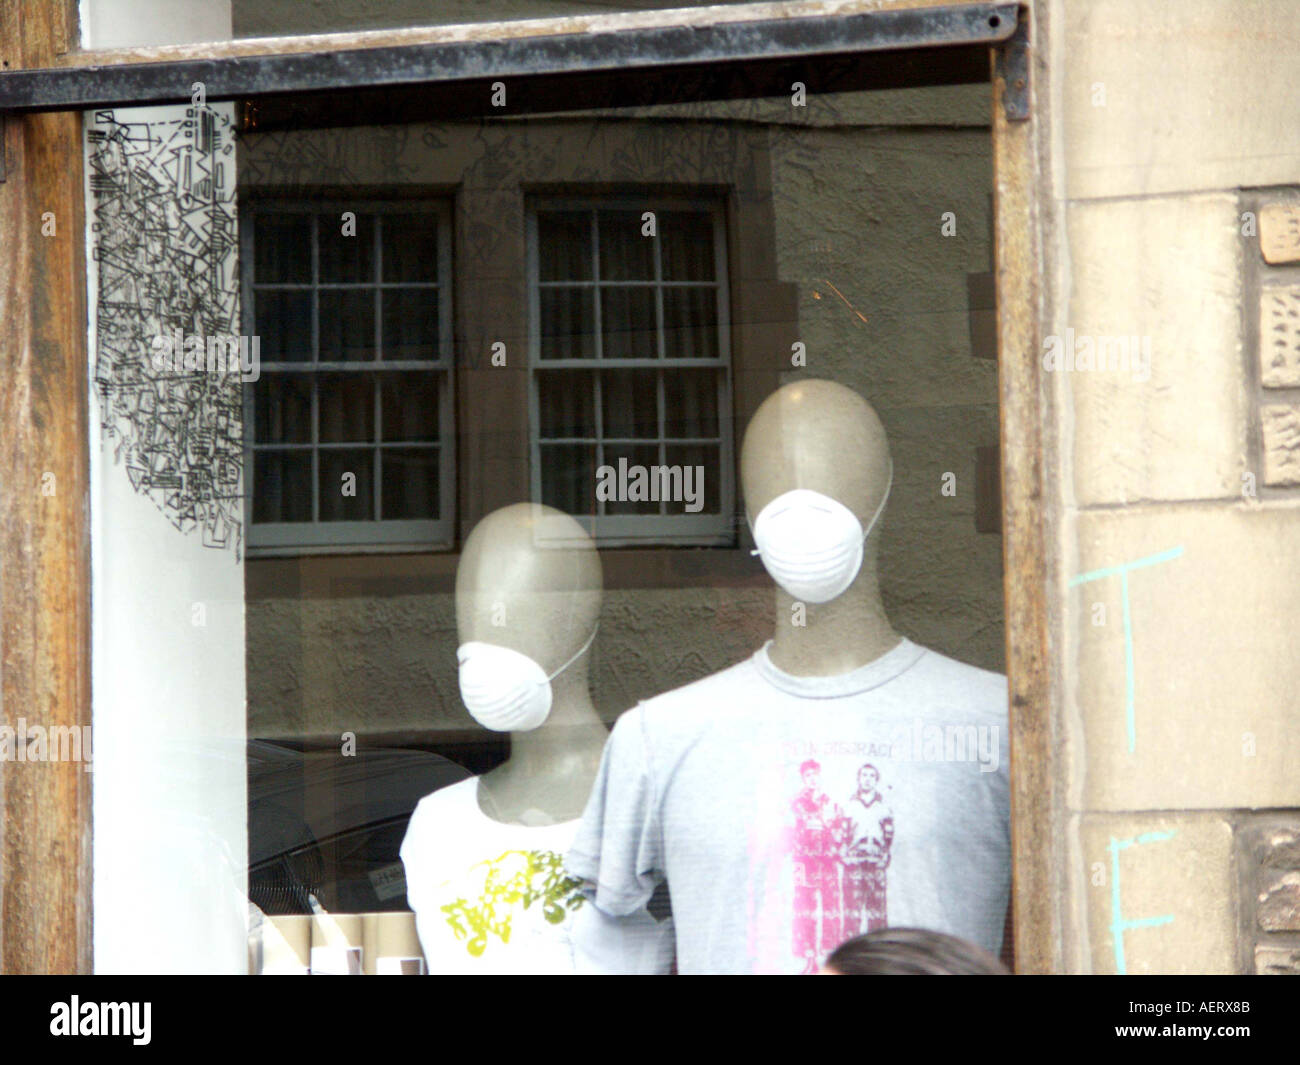 a creative window display of two bald dummies with masks at Analogue a chilled out book store 102 west bow in edinburgh scotland Stock Photo